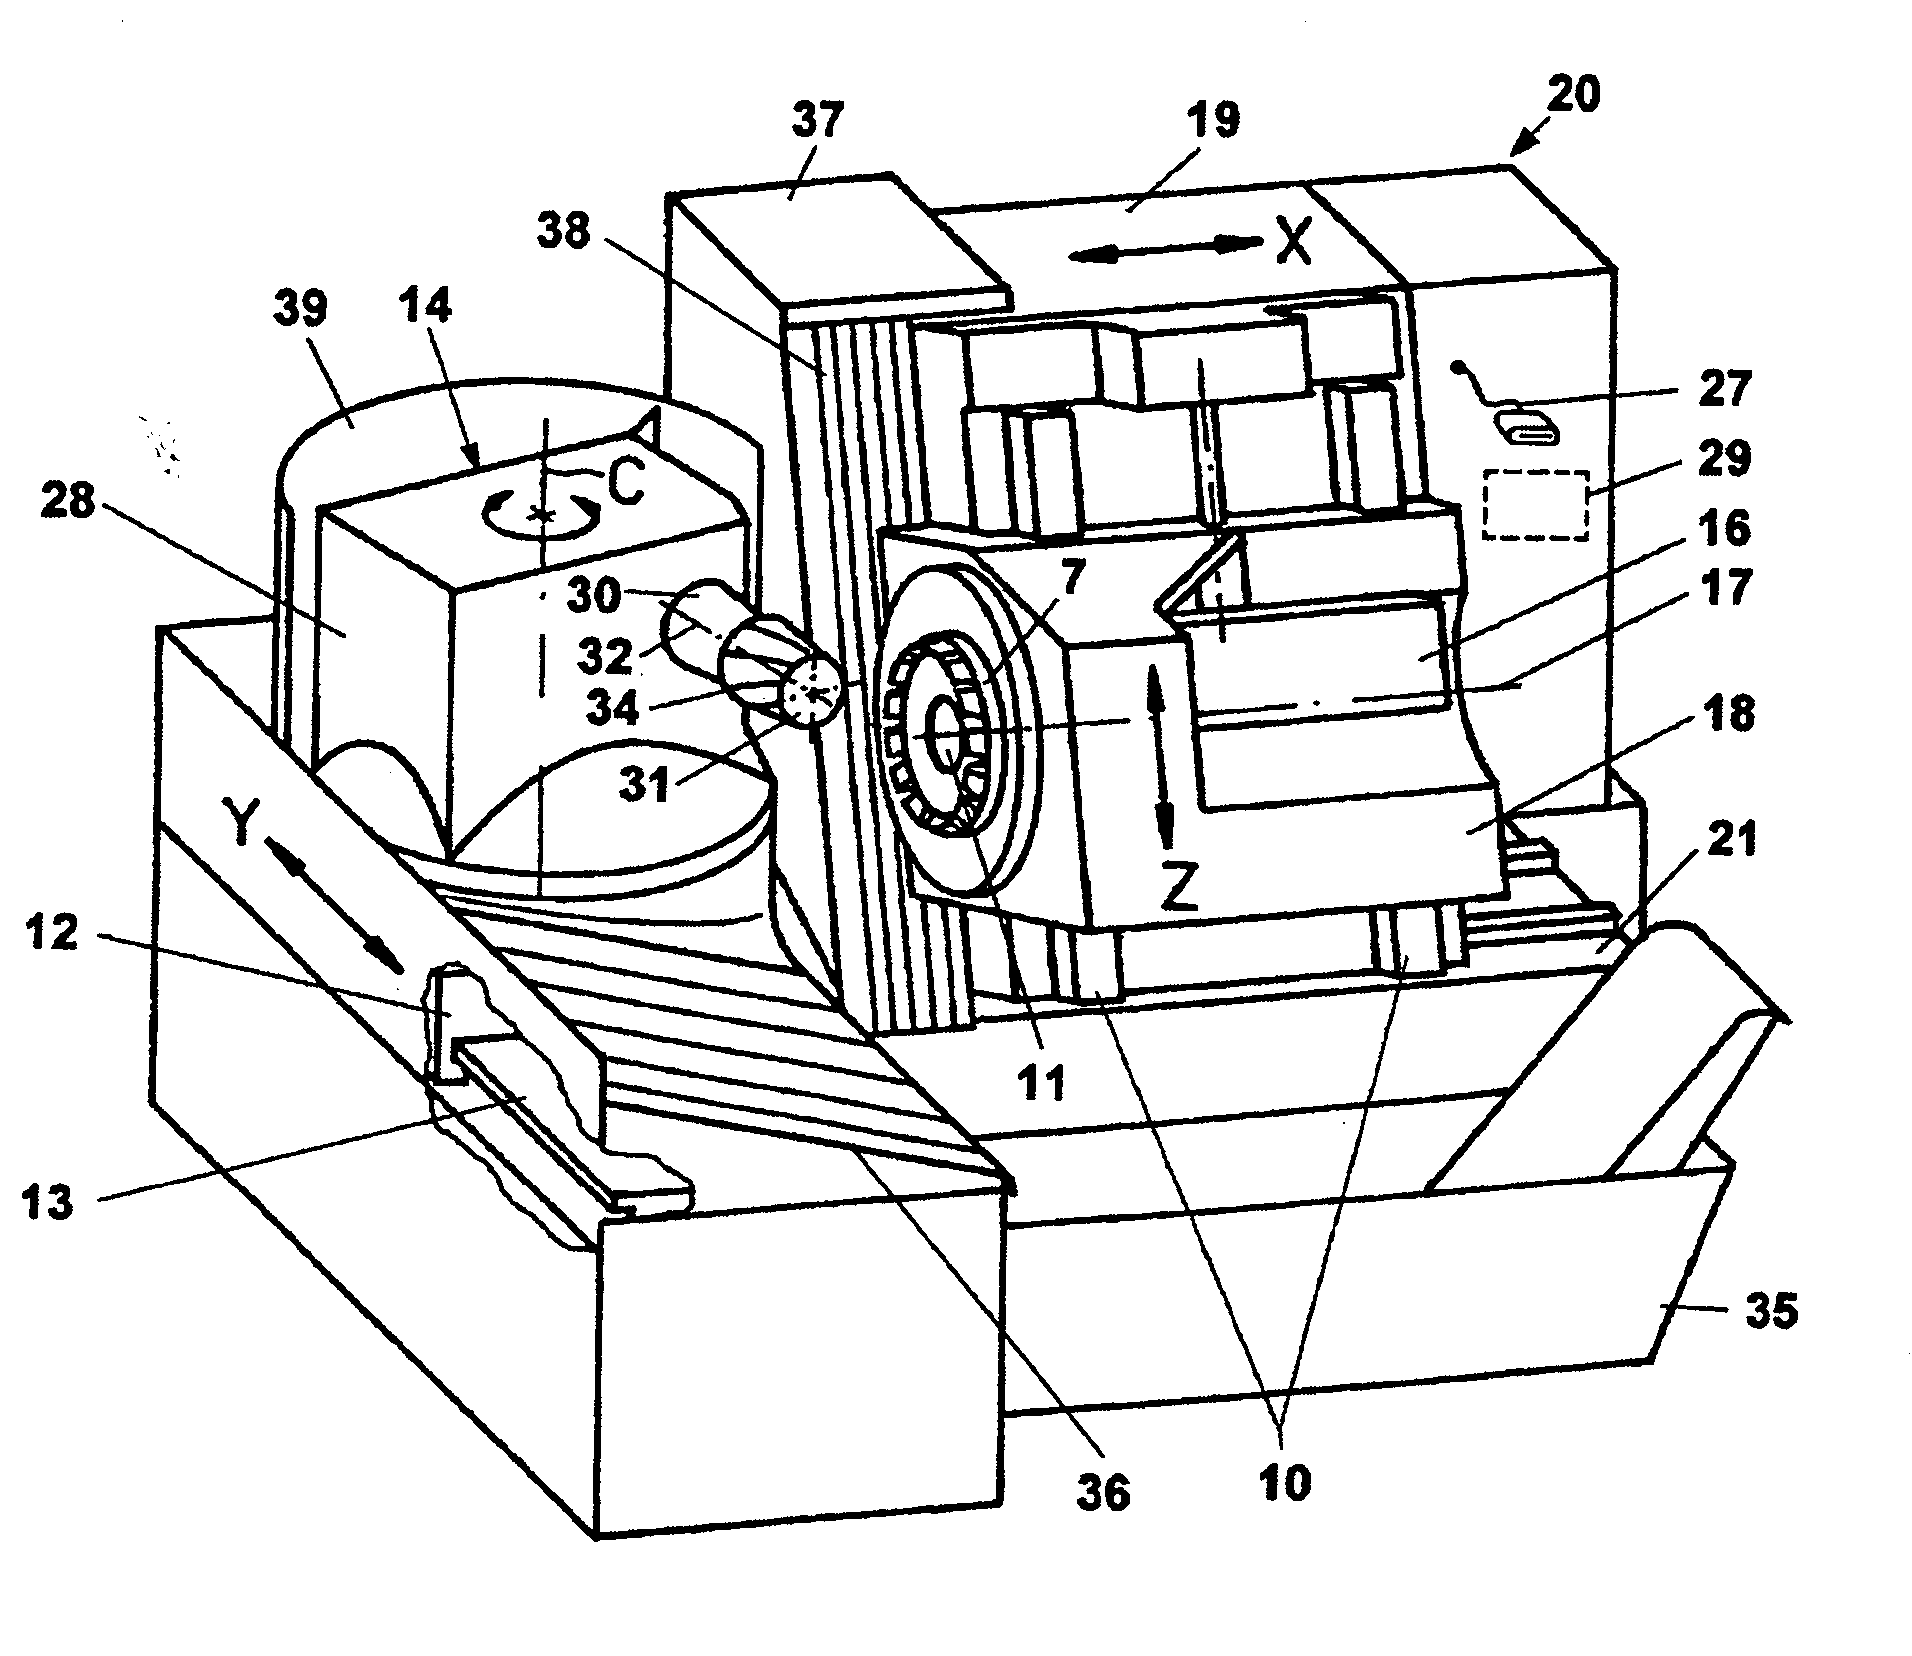 Bevel gear cutting machine for chamfering and/or deburring edges on the teeth of a bevel gear